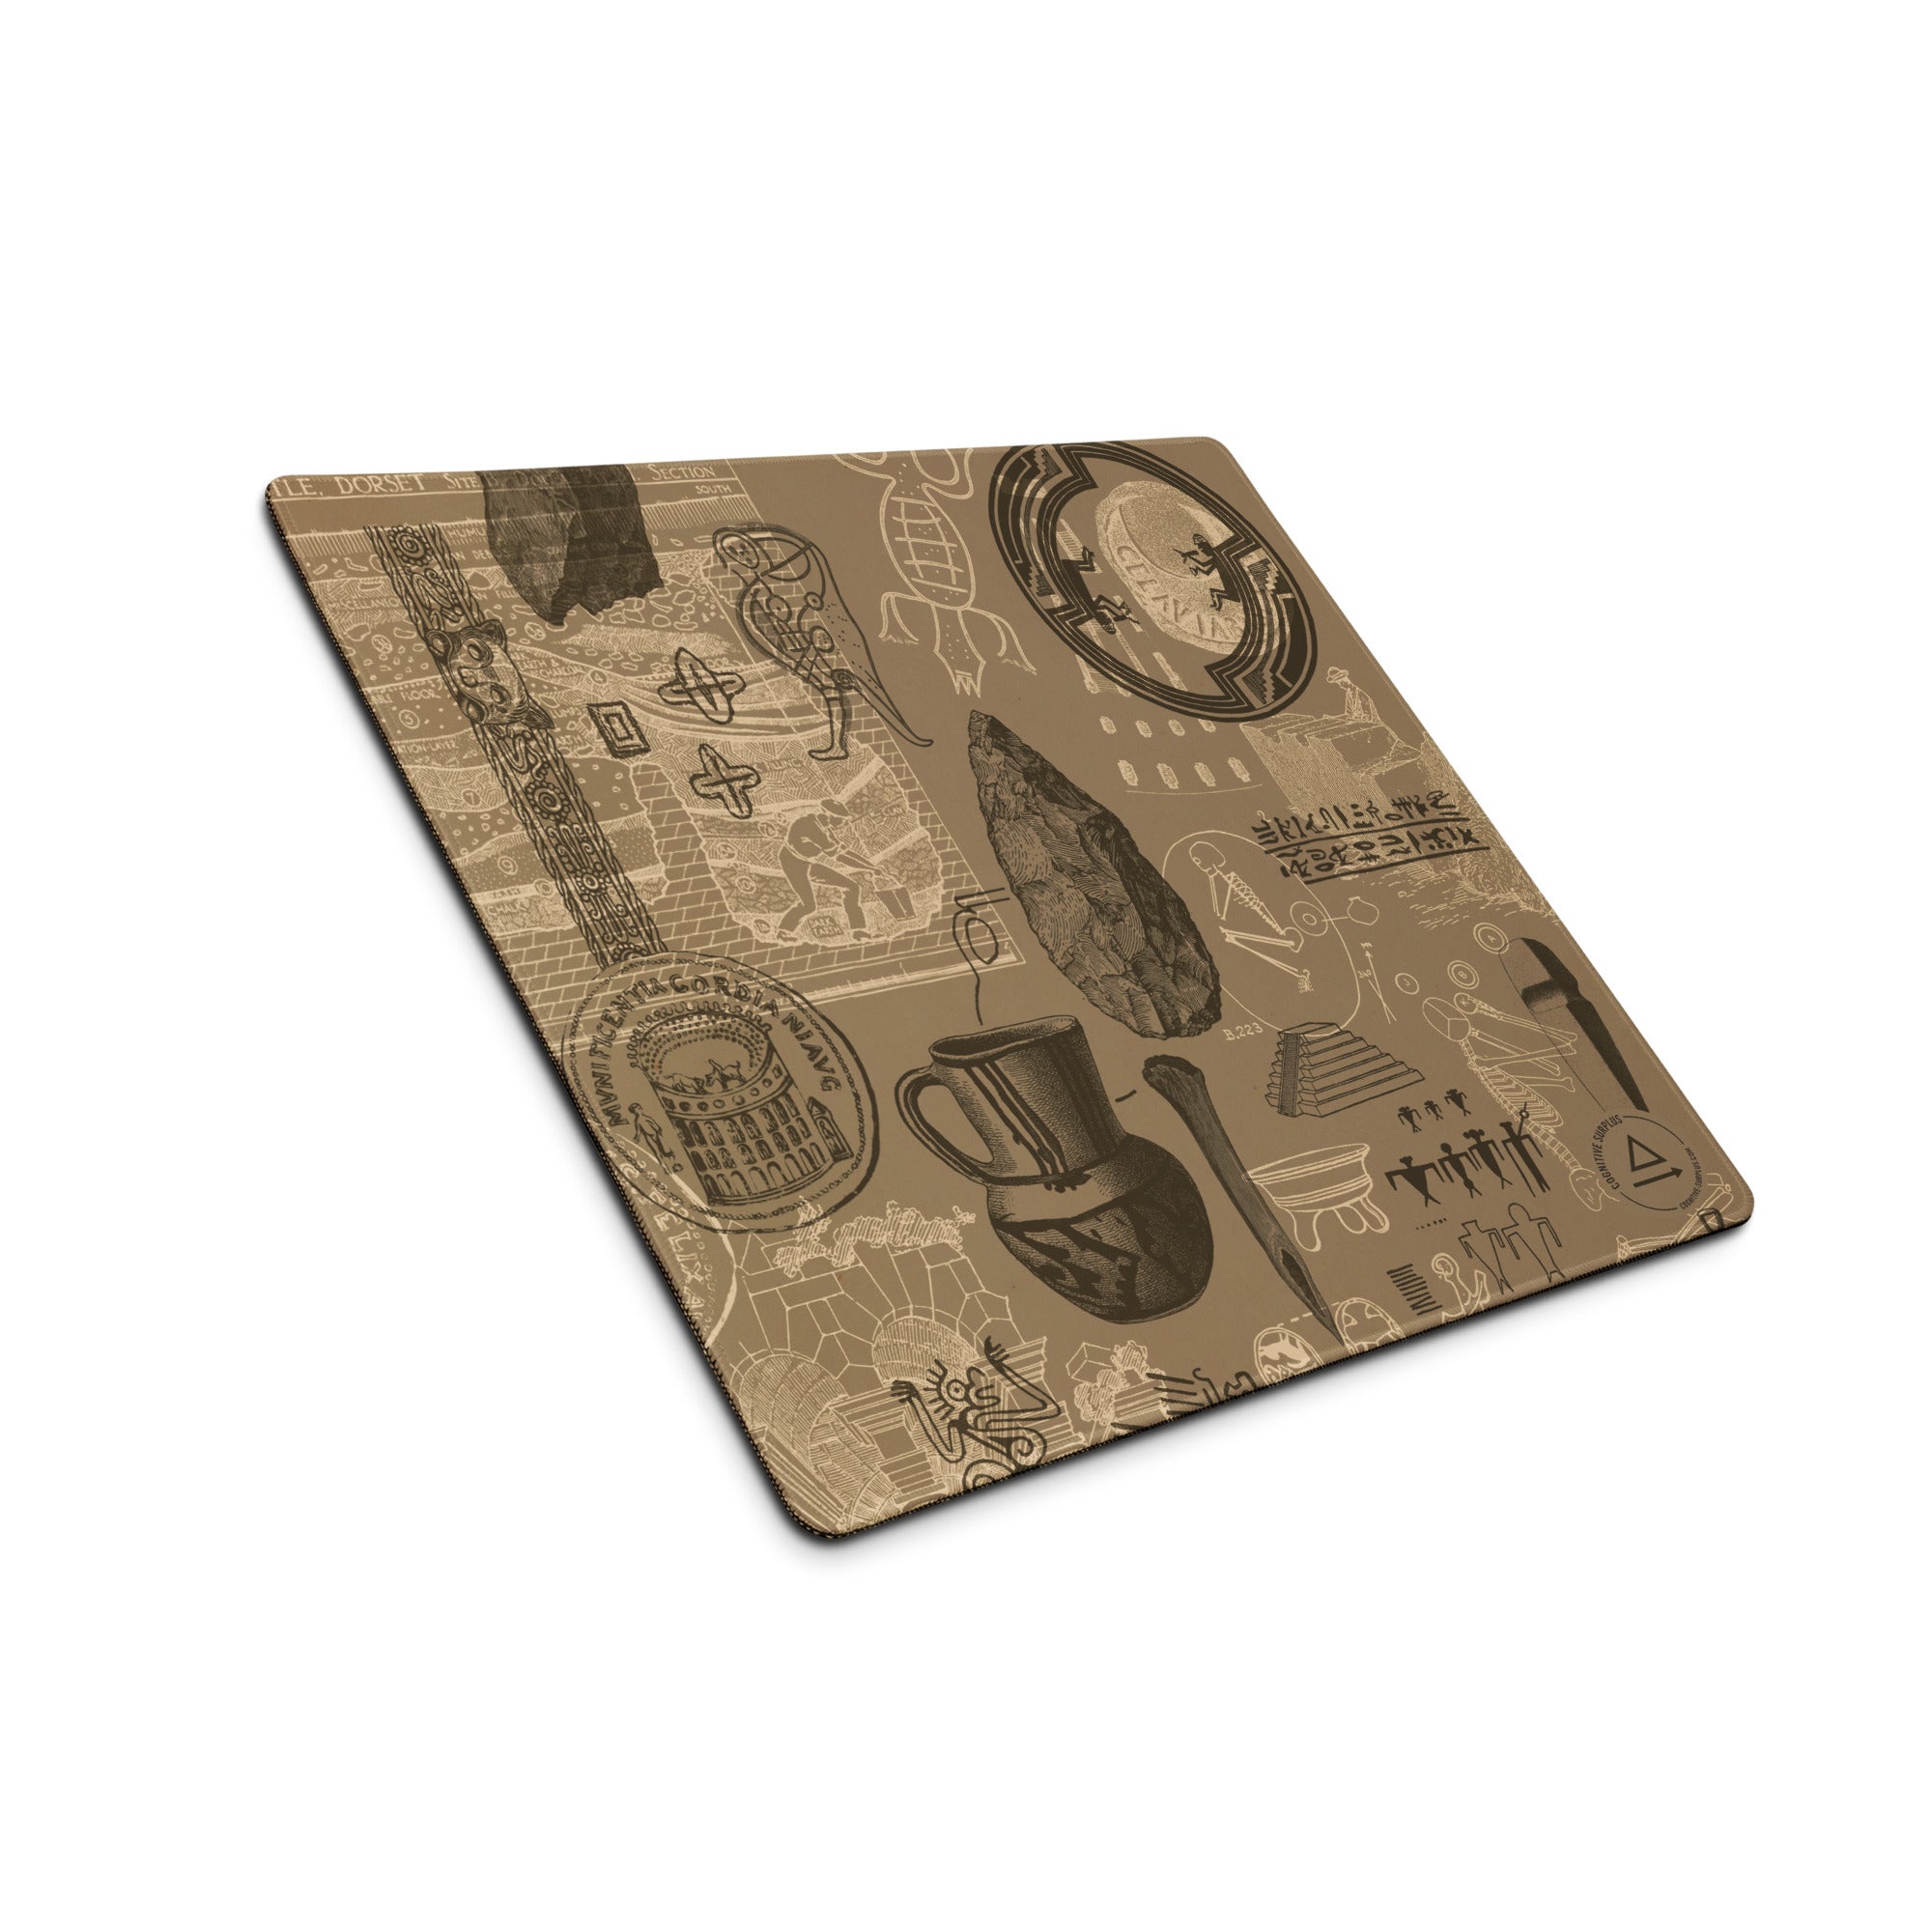 gaming-mouse-pad-white-18x16-front-6595e6f02dec0.jpg